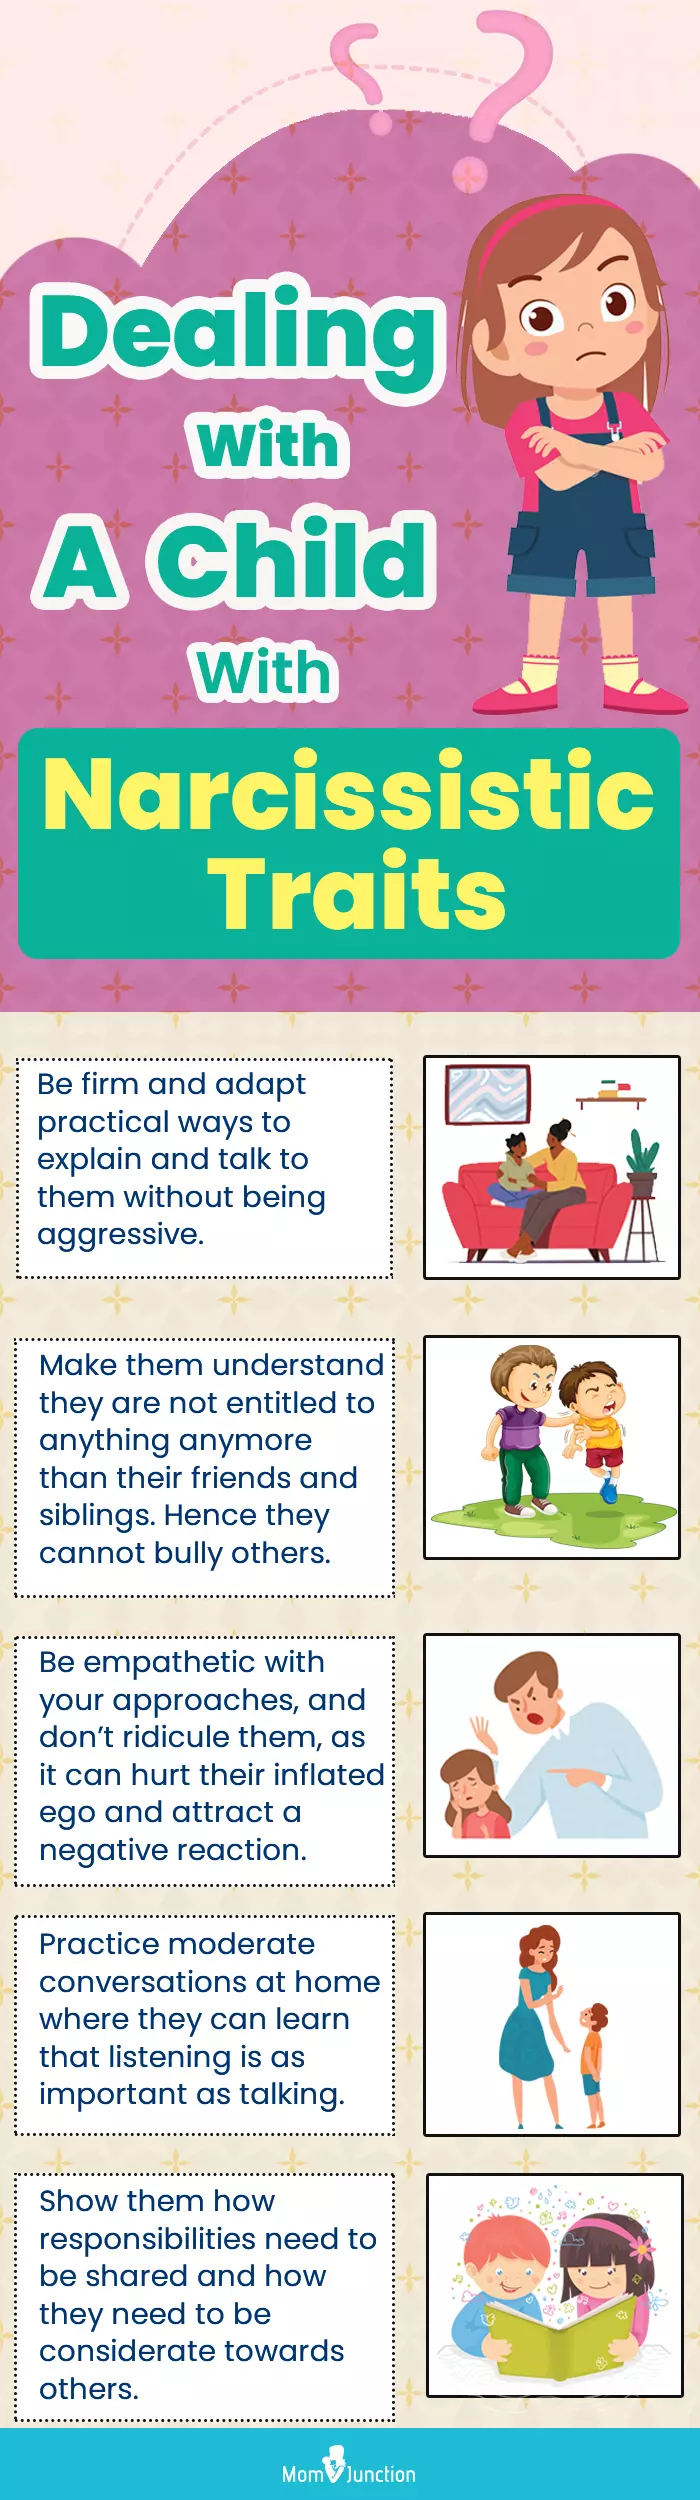 dealing with a child with narcissistic traits (infographic)